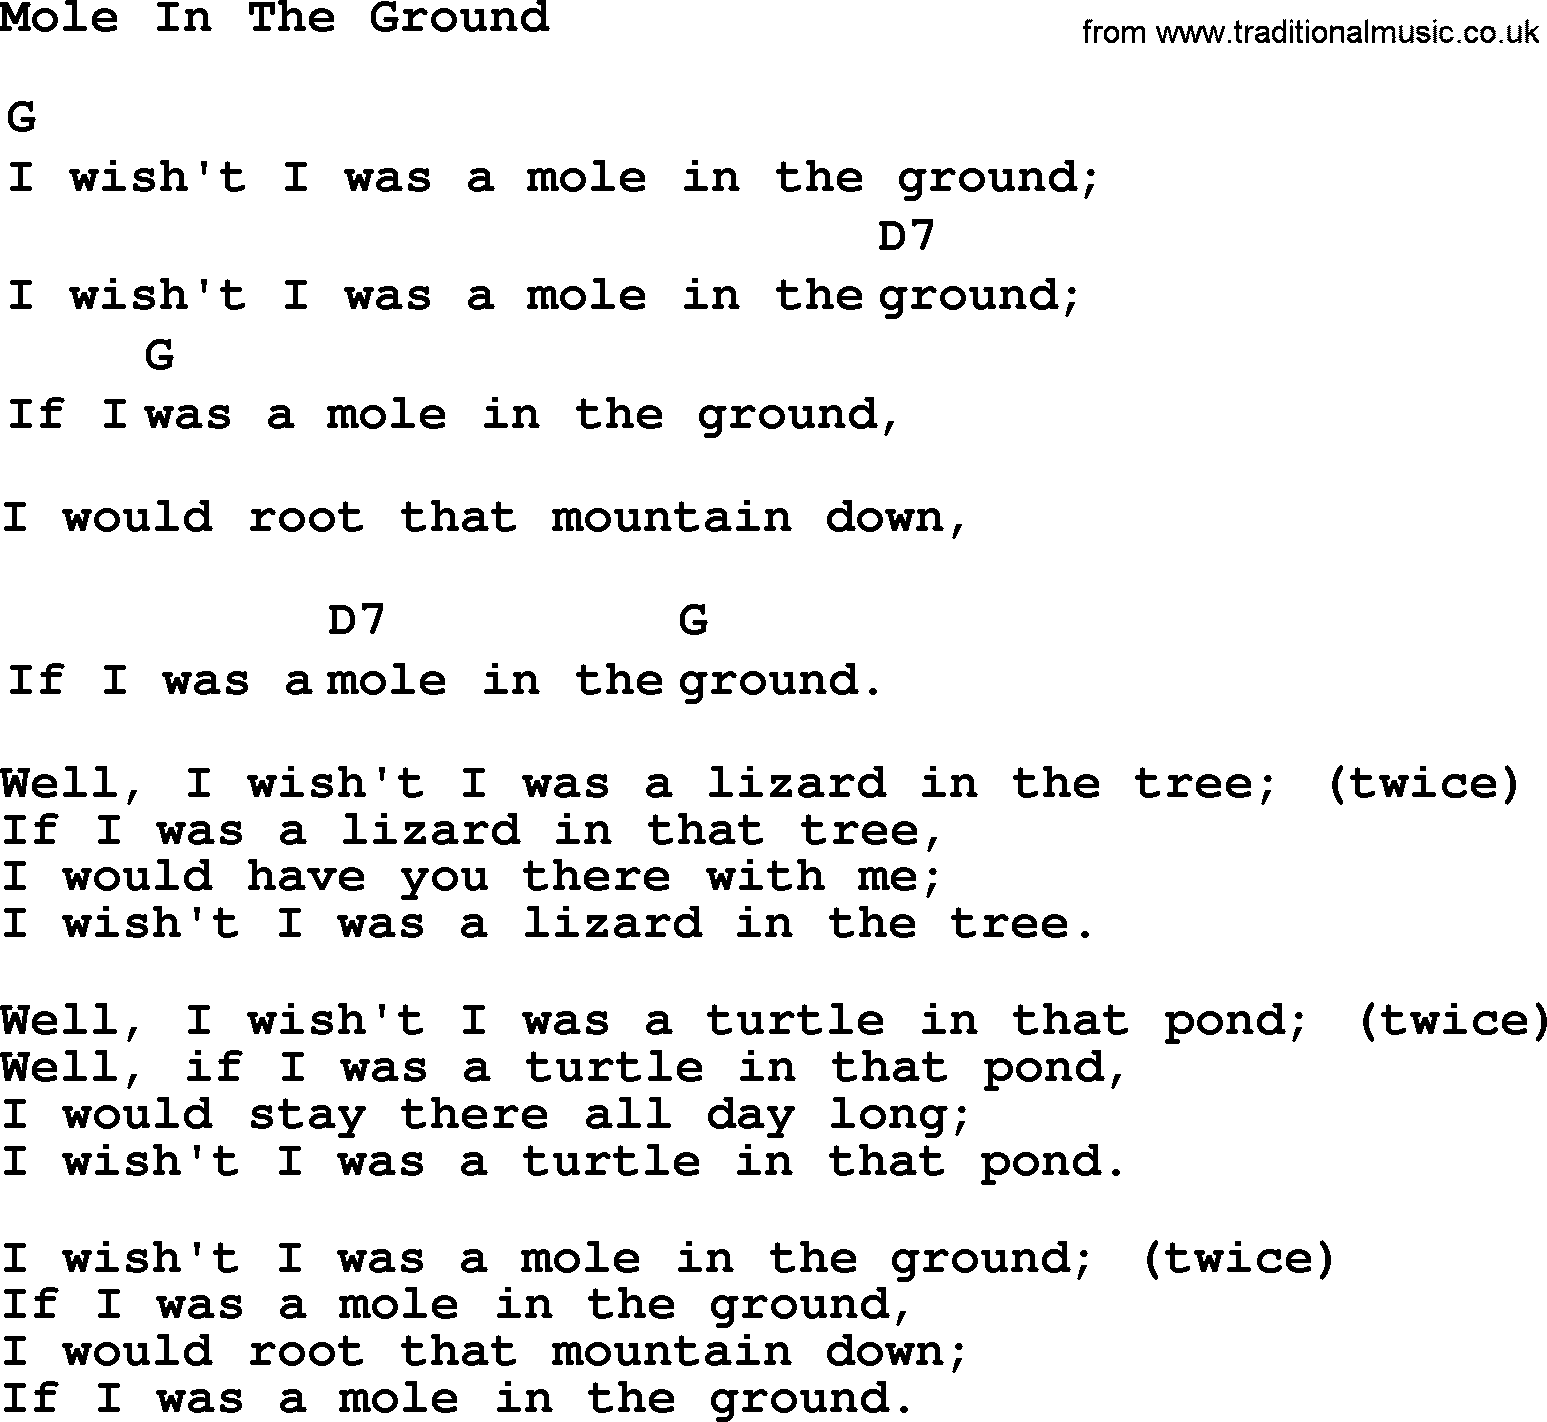 Top 1000 Most Popular Folk and Old-time Songs: Mole In The Ground, lyrics and chords